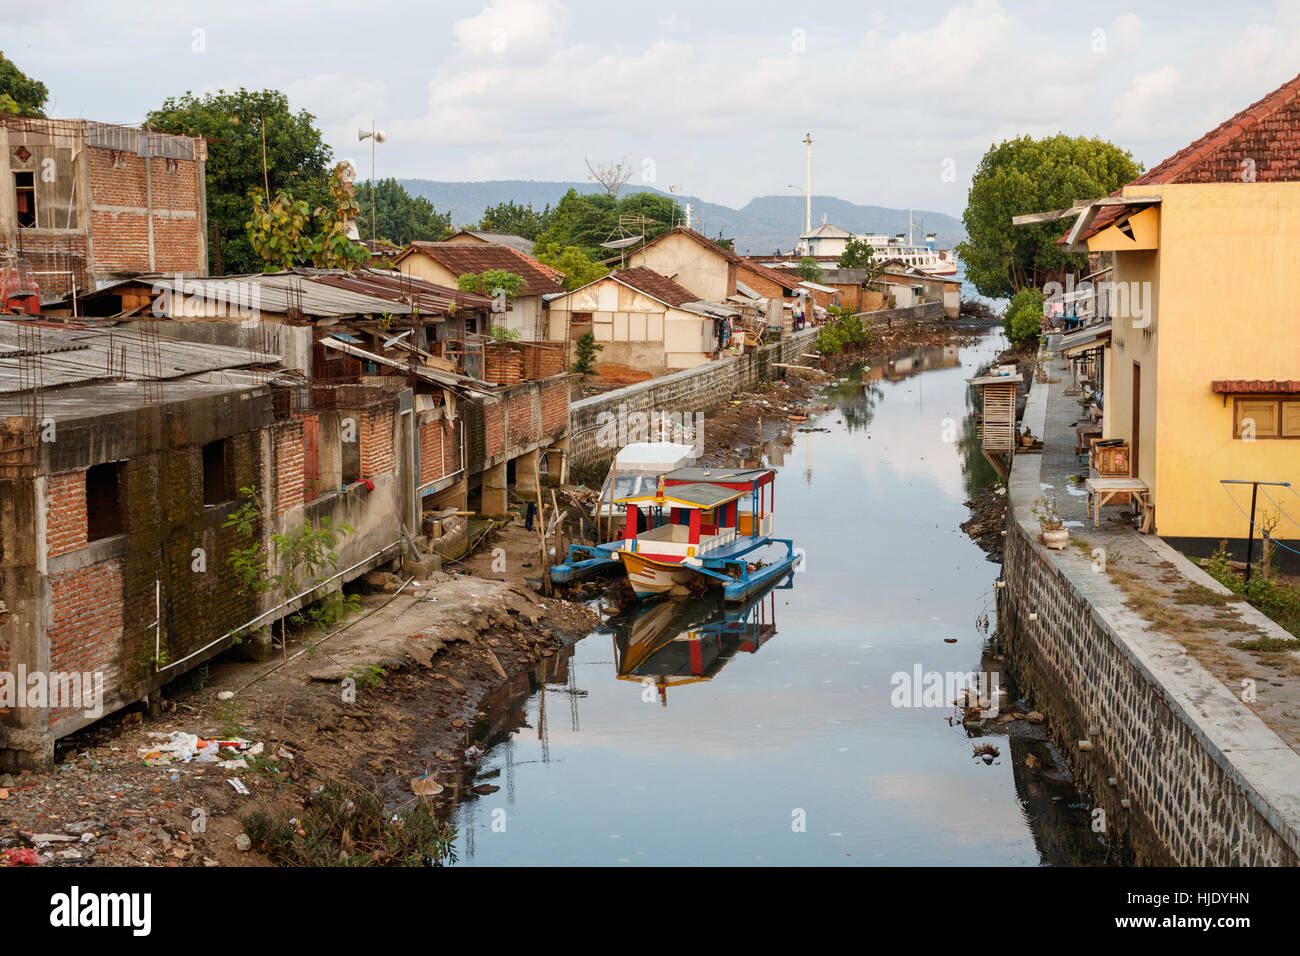 View over slums on the banks of a small river flowing through Banyuwangi, Java, Indonesia. Stock Photo